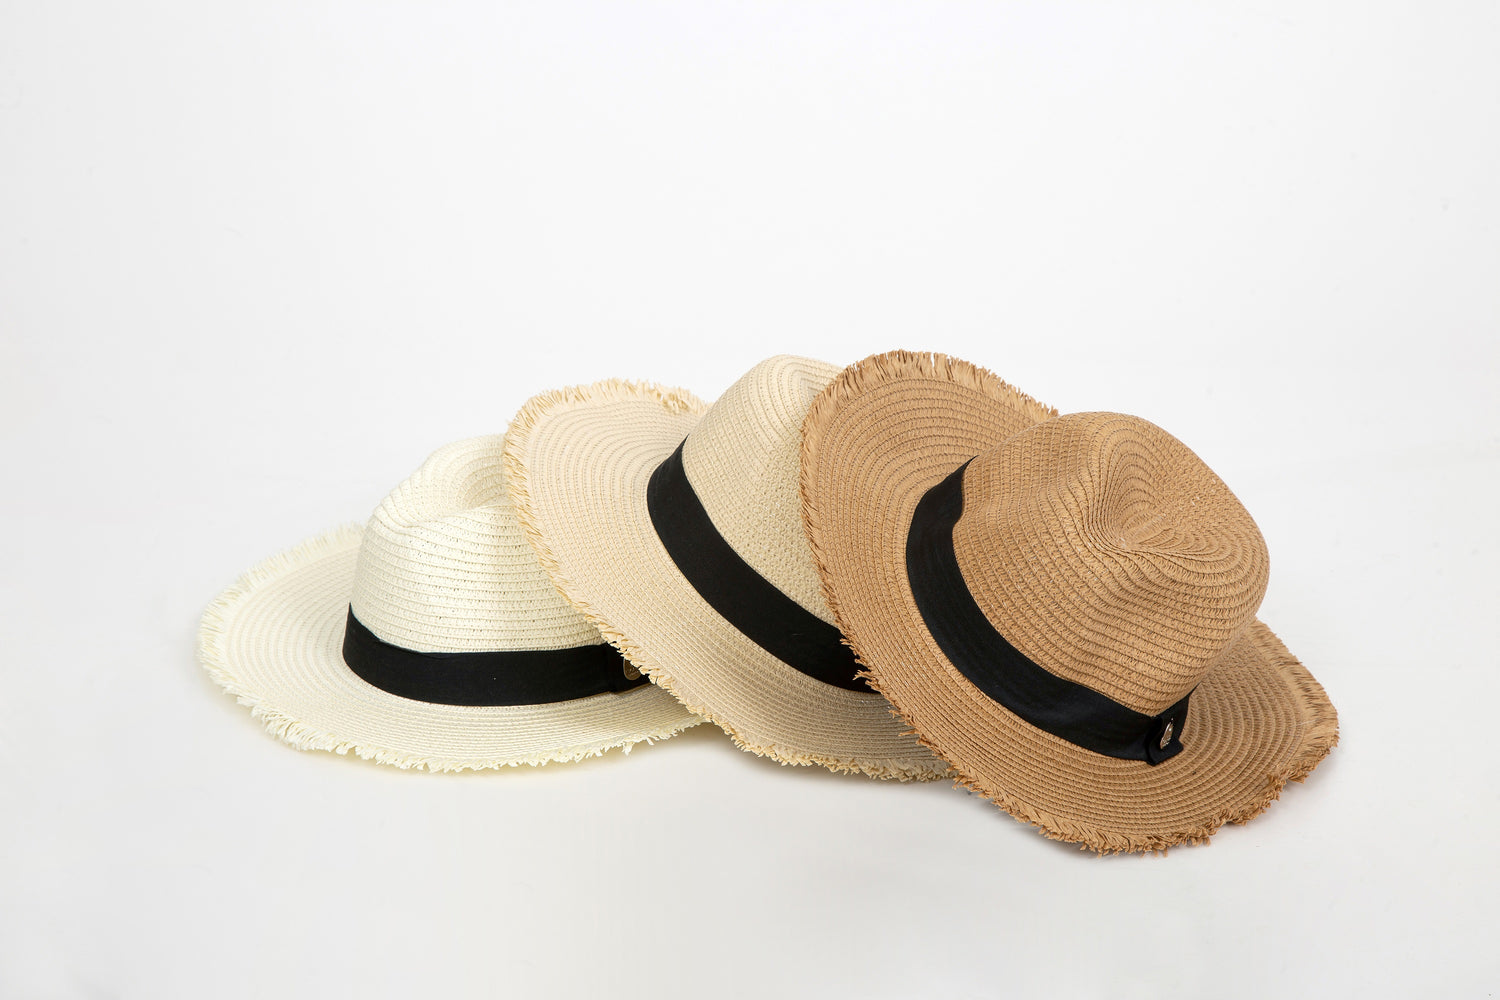 Fedora Straw Hat with Frill Edges